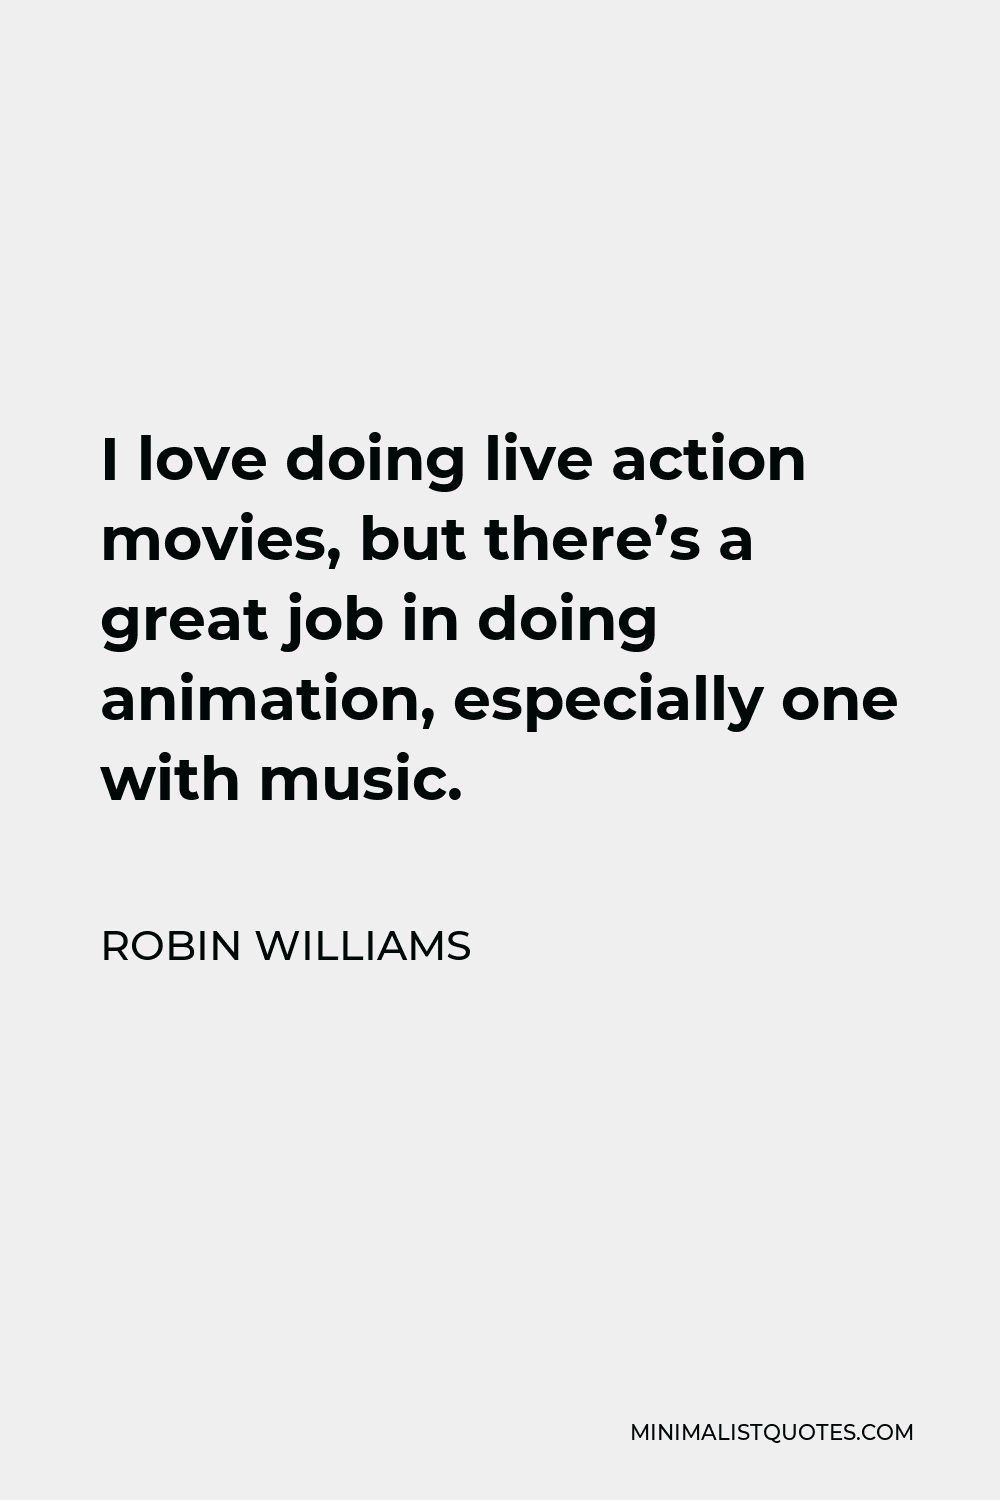 Robin Williams Quote - I love doing live action movies, but there’s a great job in doing animation, especially one with music.